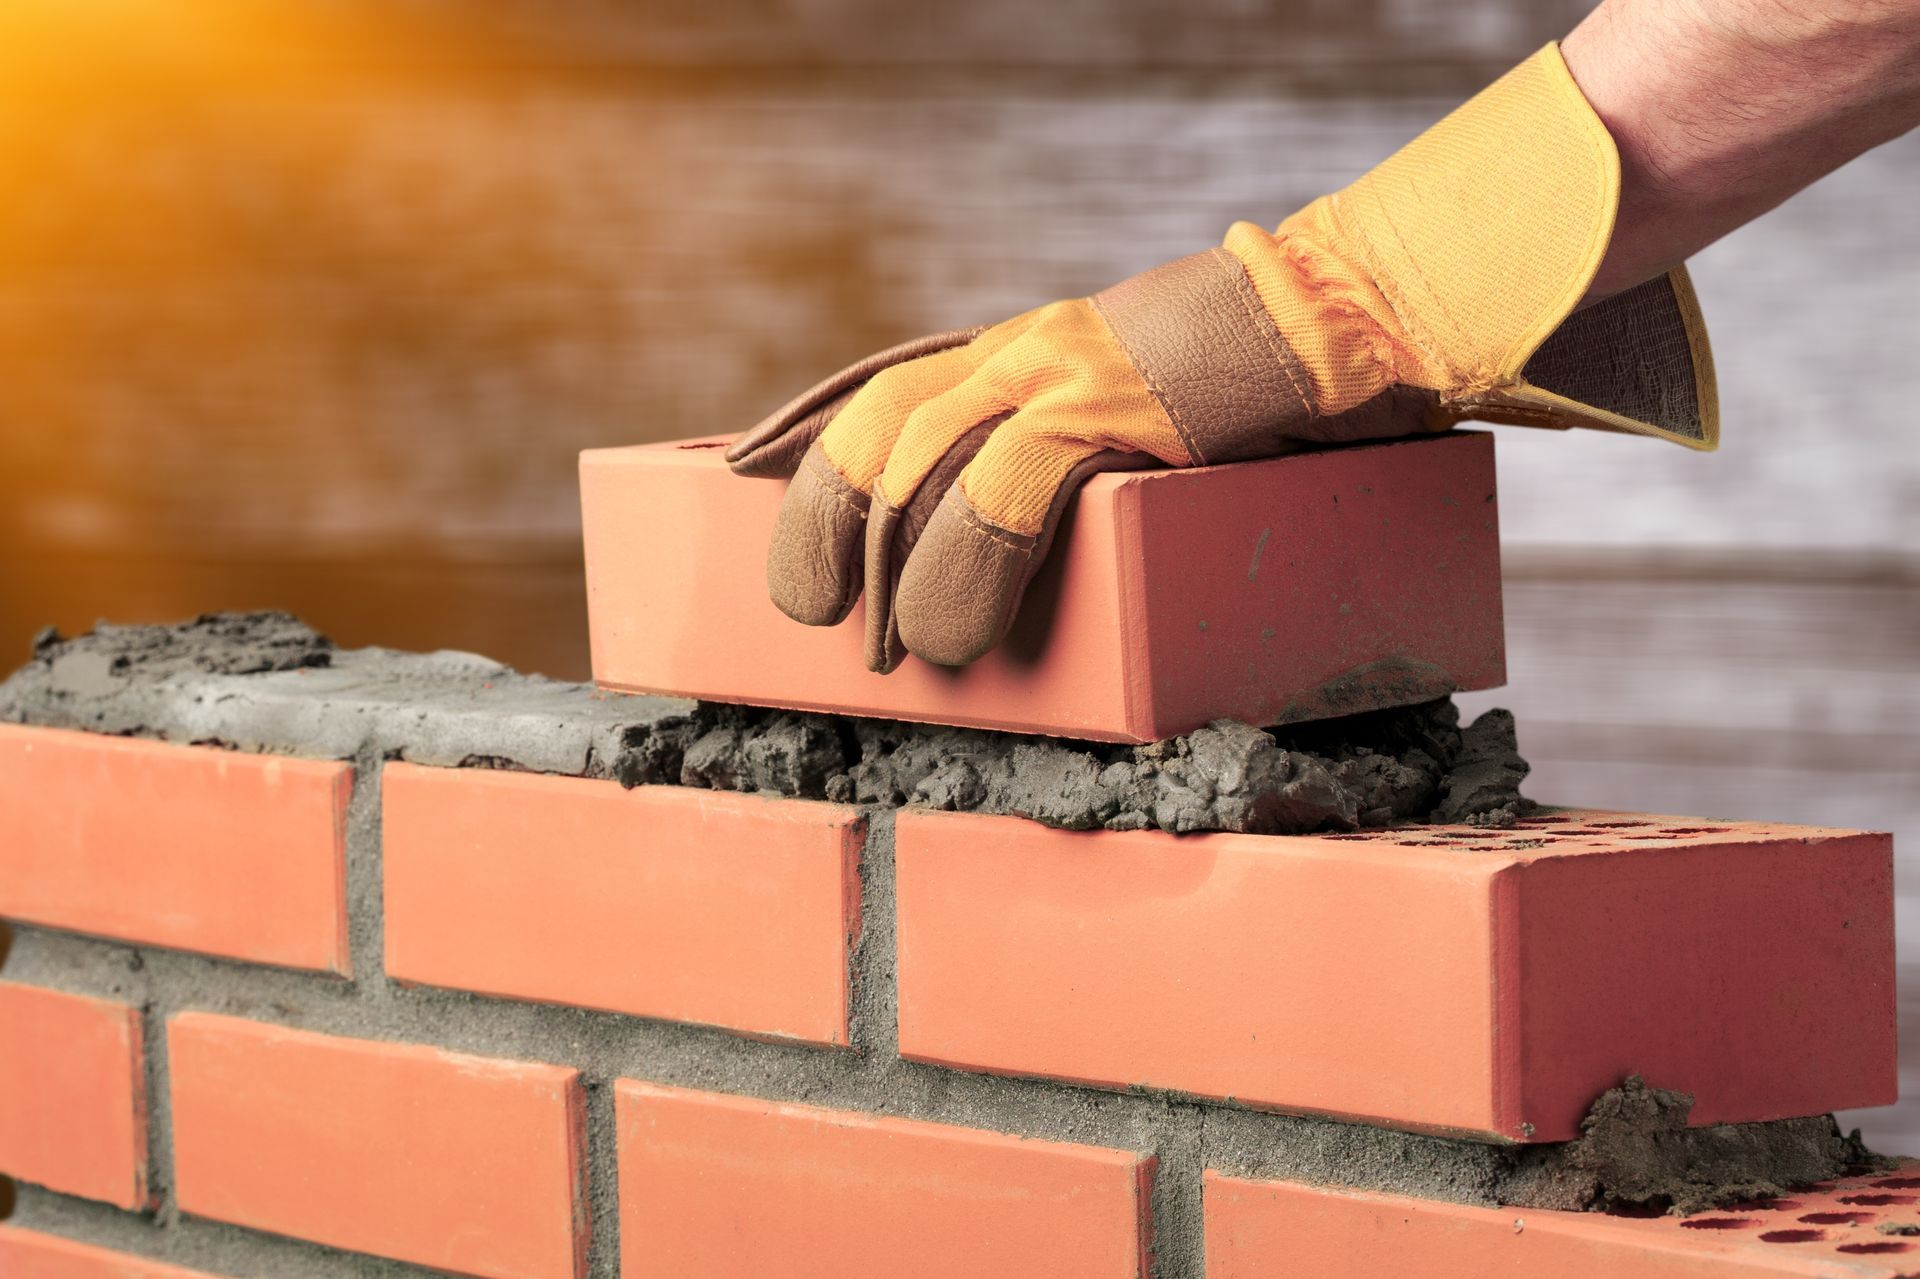 a person wearing gloves is putting a brick on top of another brick